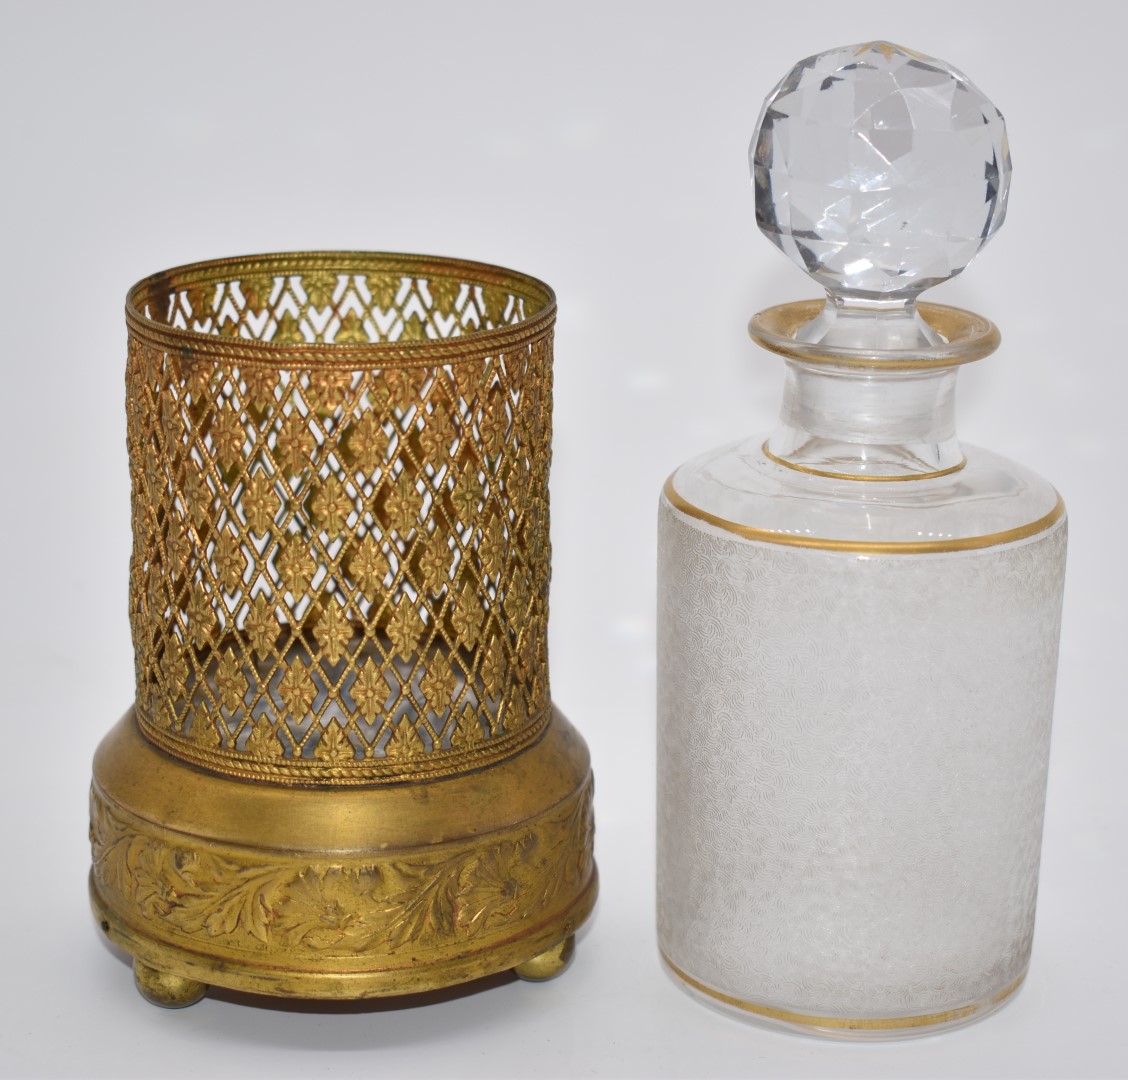 French gilt metal musical box scent bottle holder with embossed decoration, cut glass stopper and - Image 2 of 3